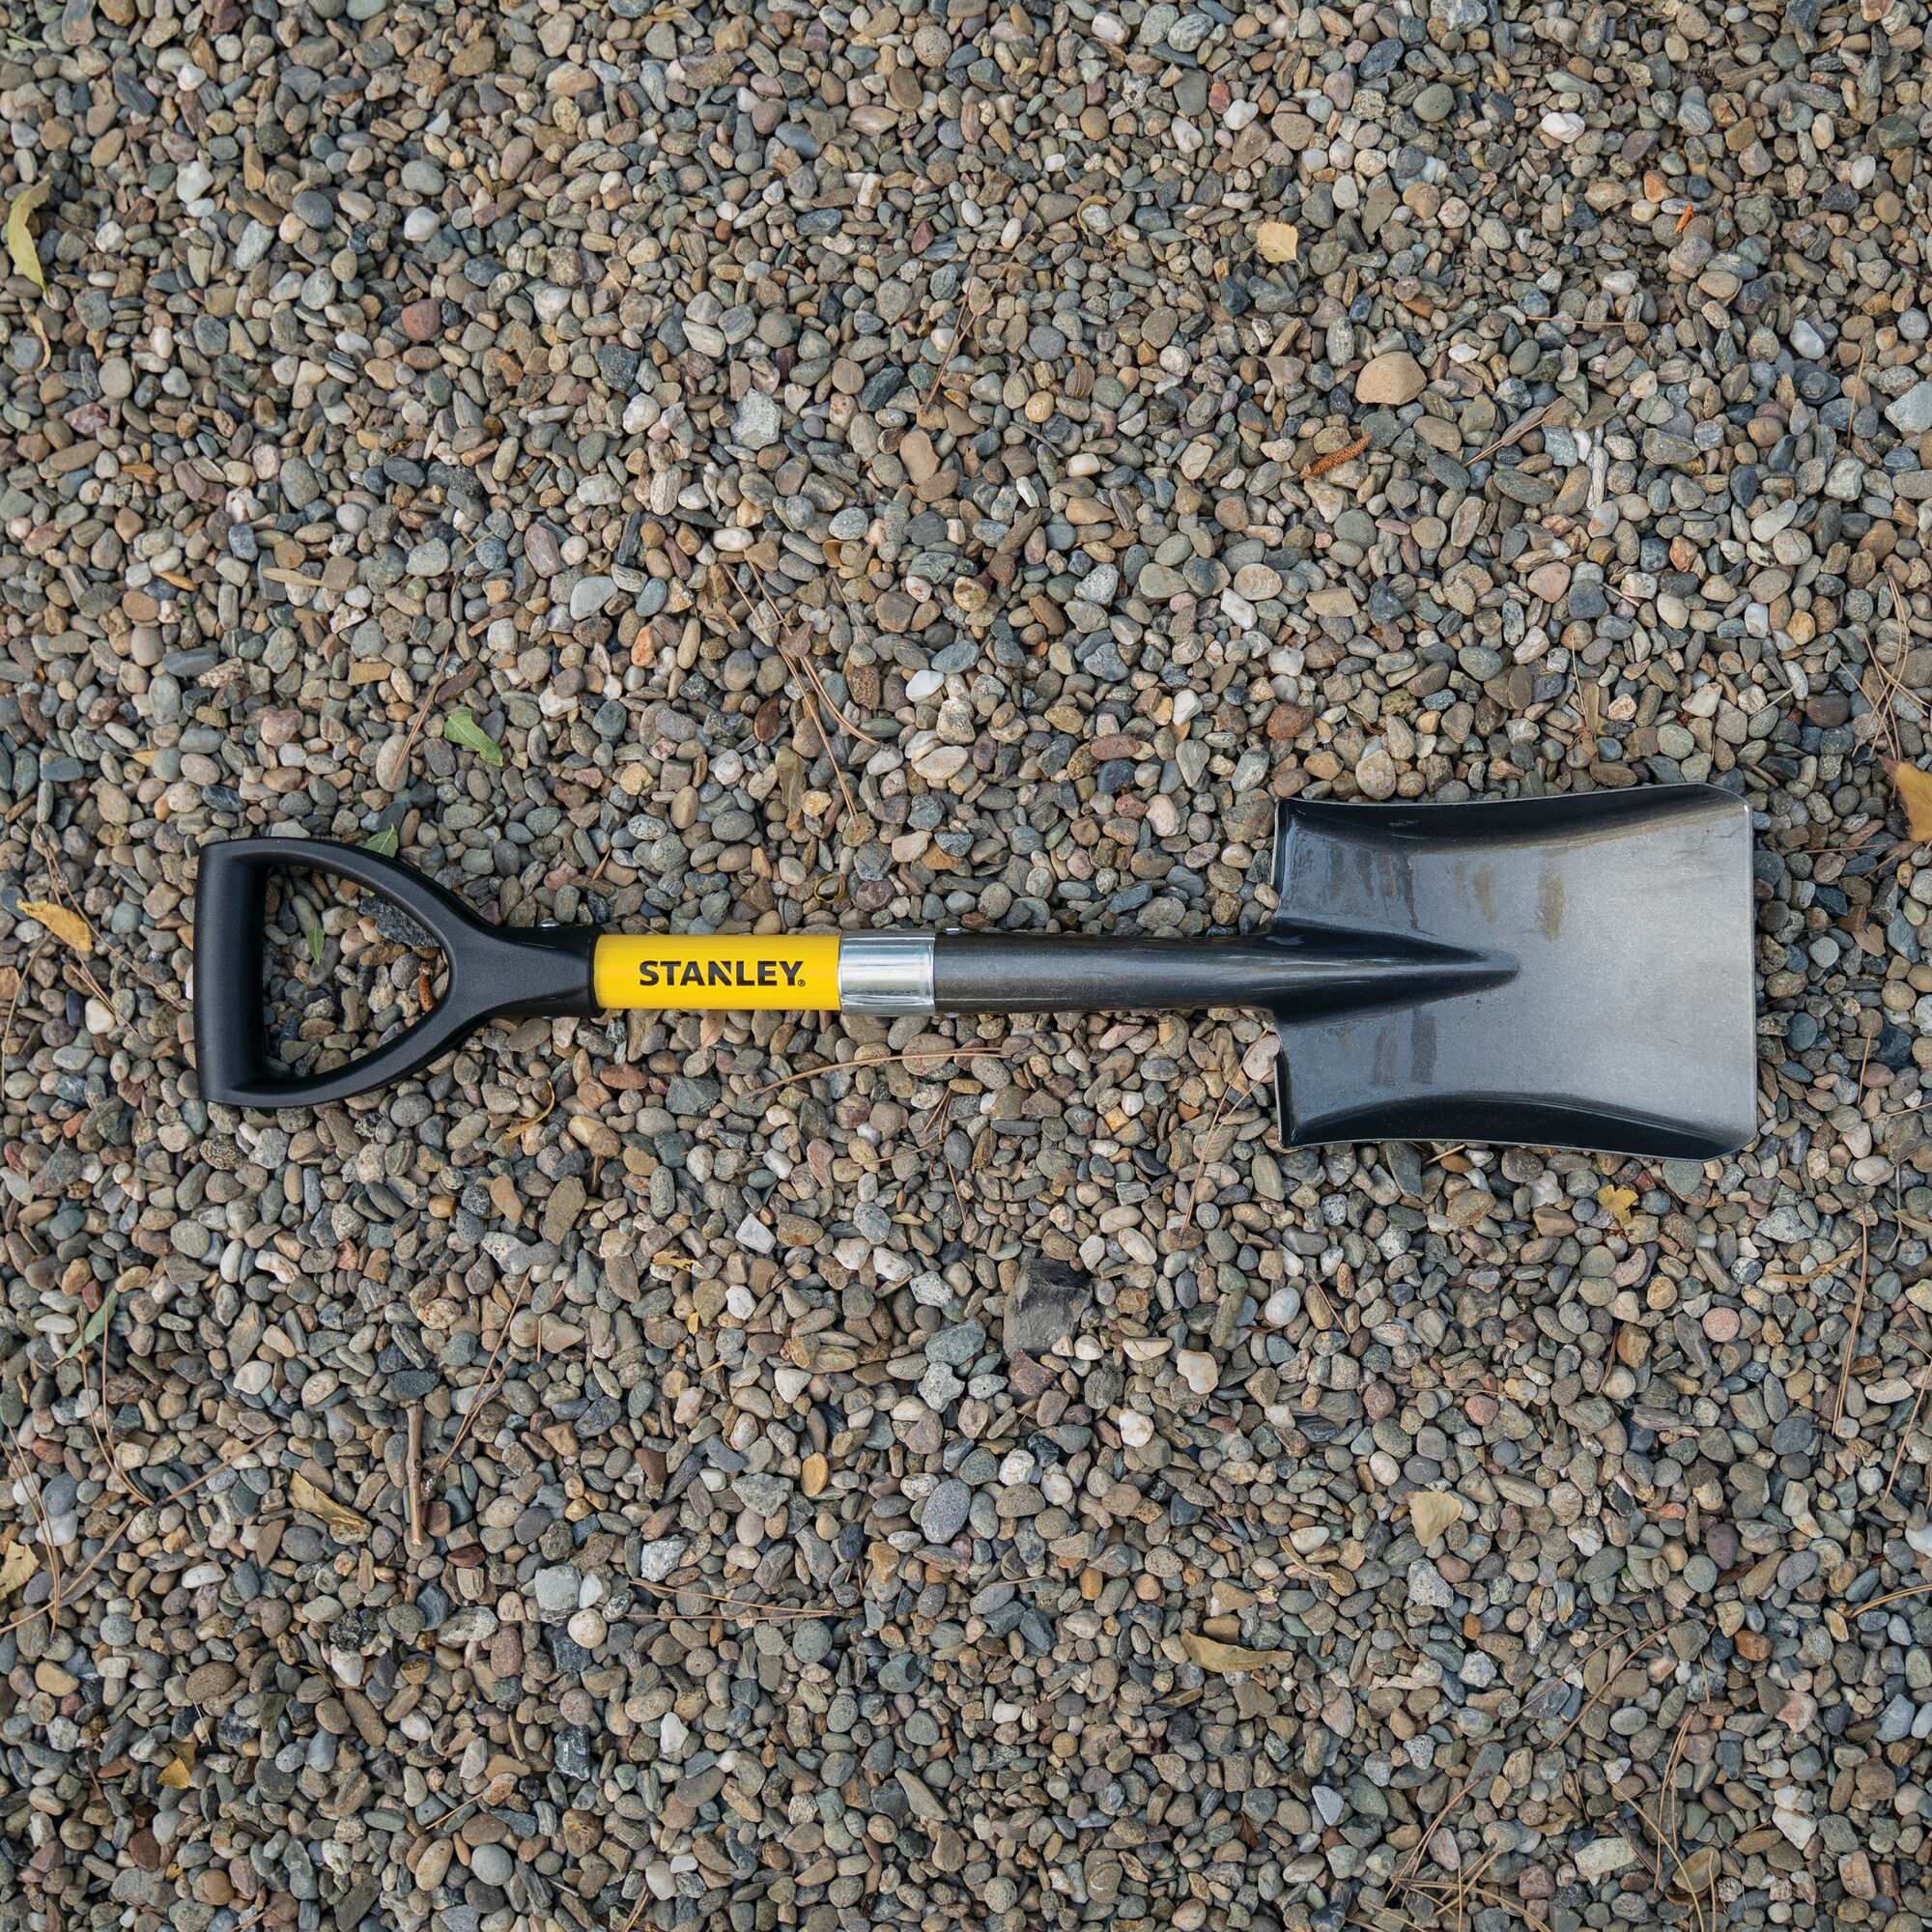 Mini D square head shovel placed on granulated materials.